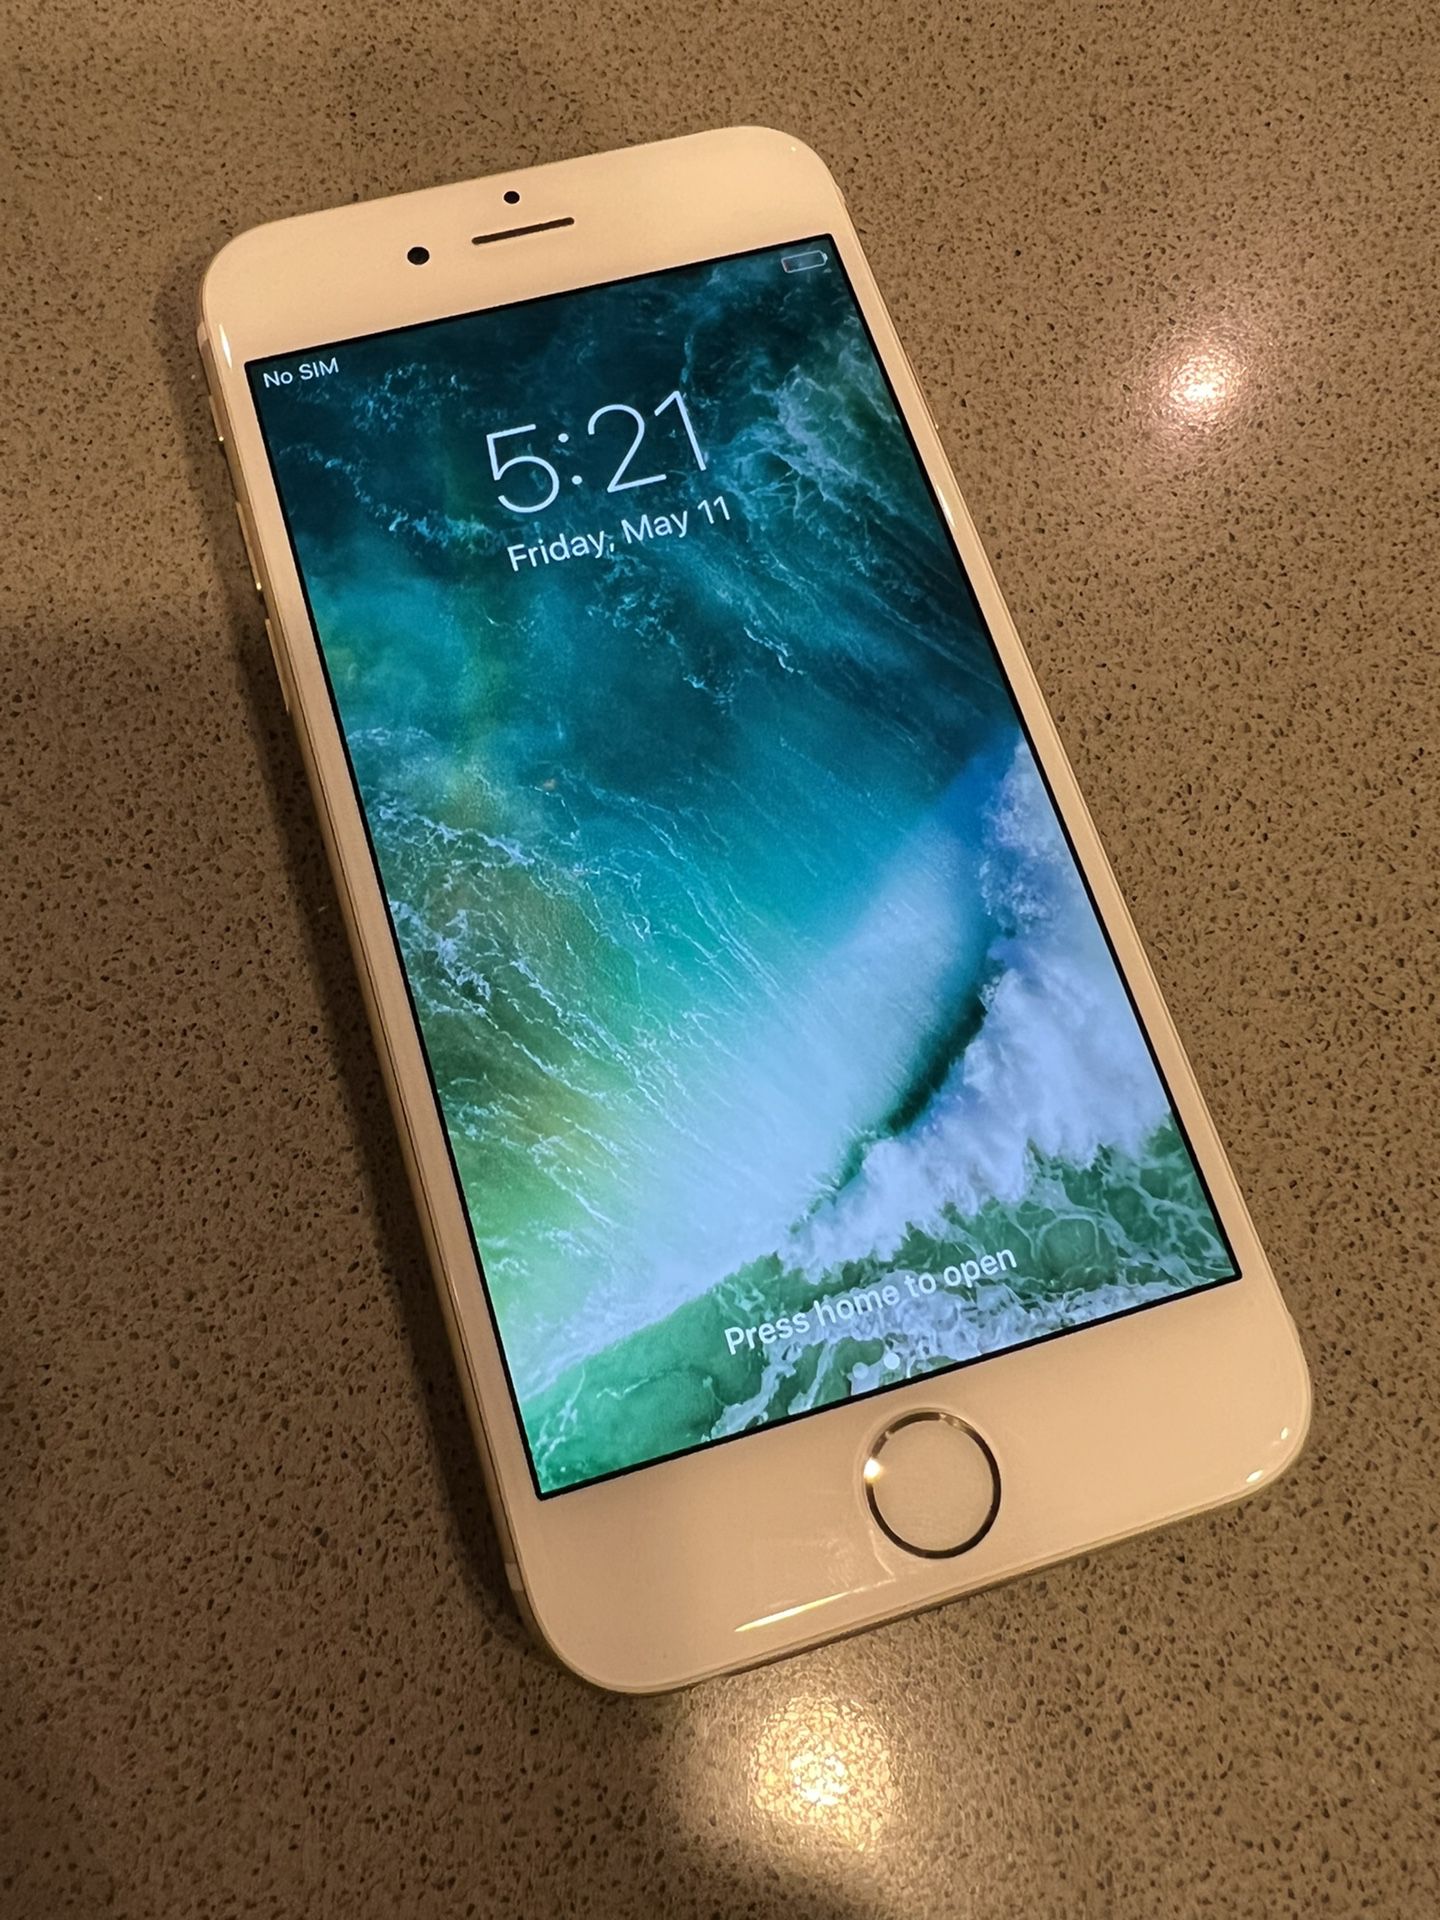 Apple Iphone 6 Gold 64 Gb For Sale In Spring Valley Ca Offerup